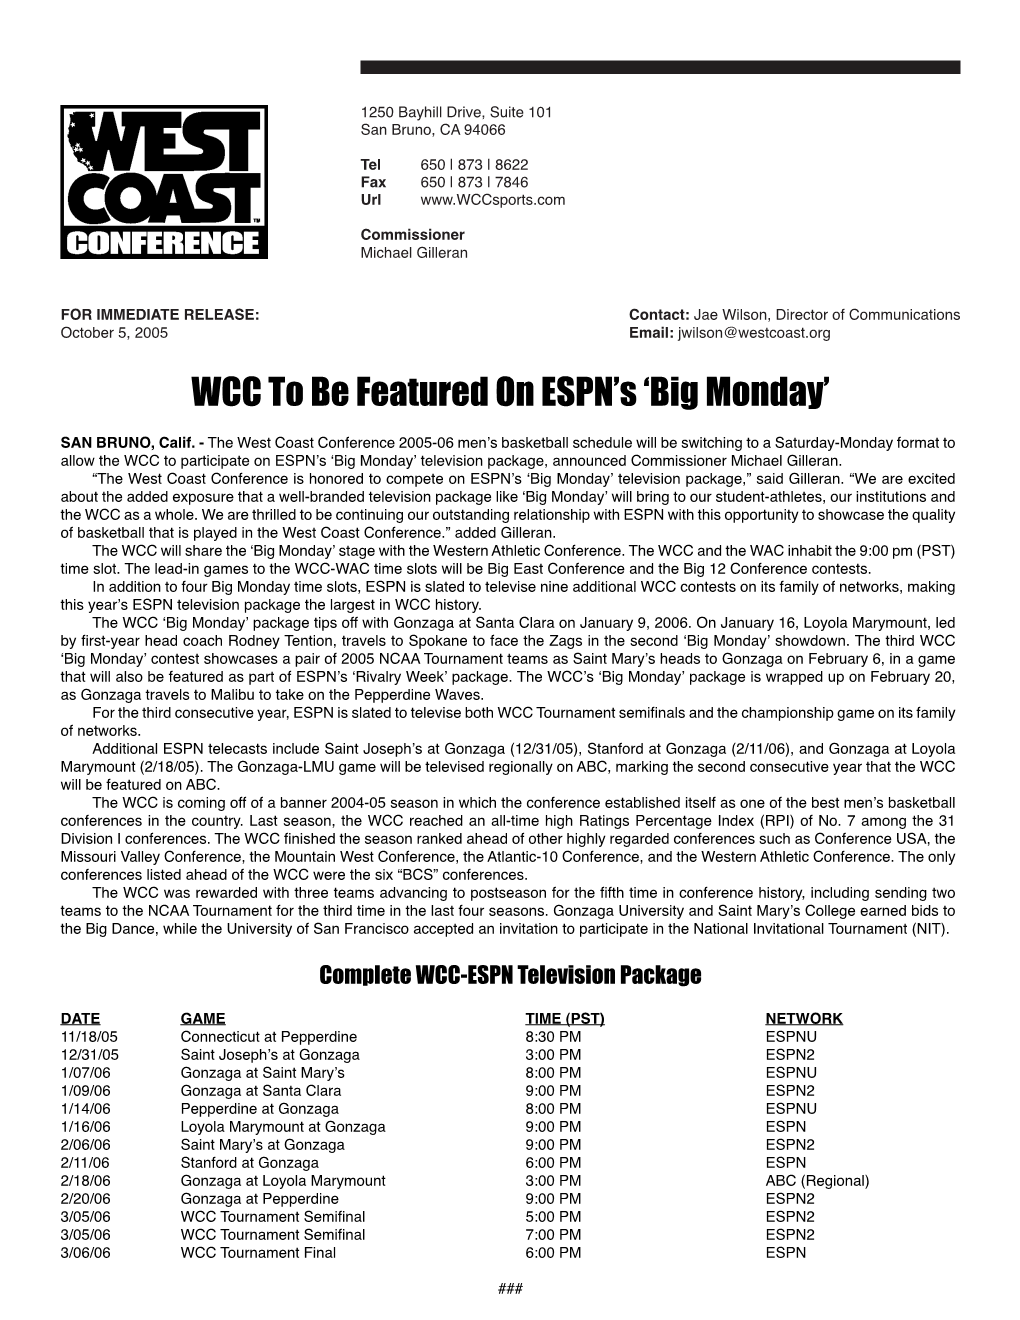 WCC to Be Featured on ESPN's 'Big Monday'